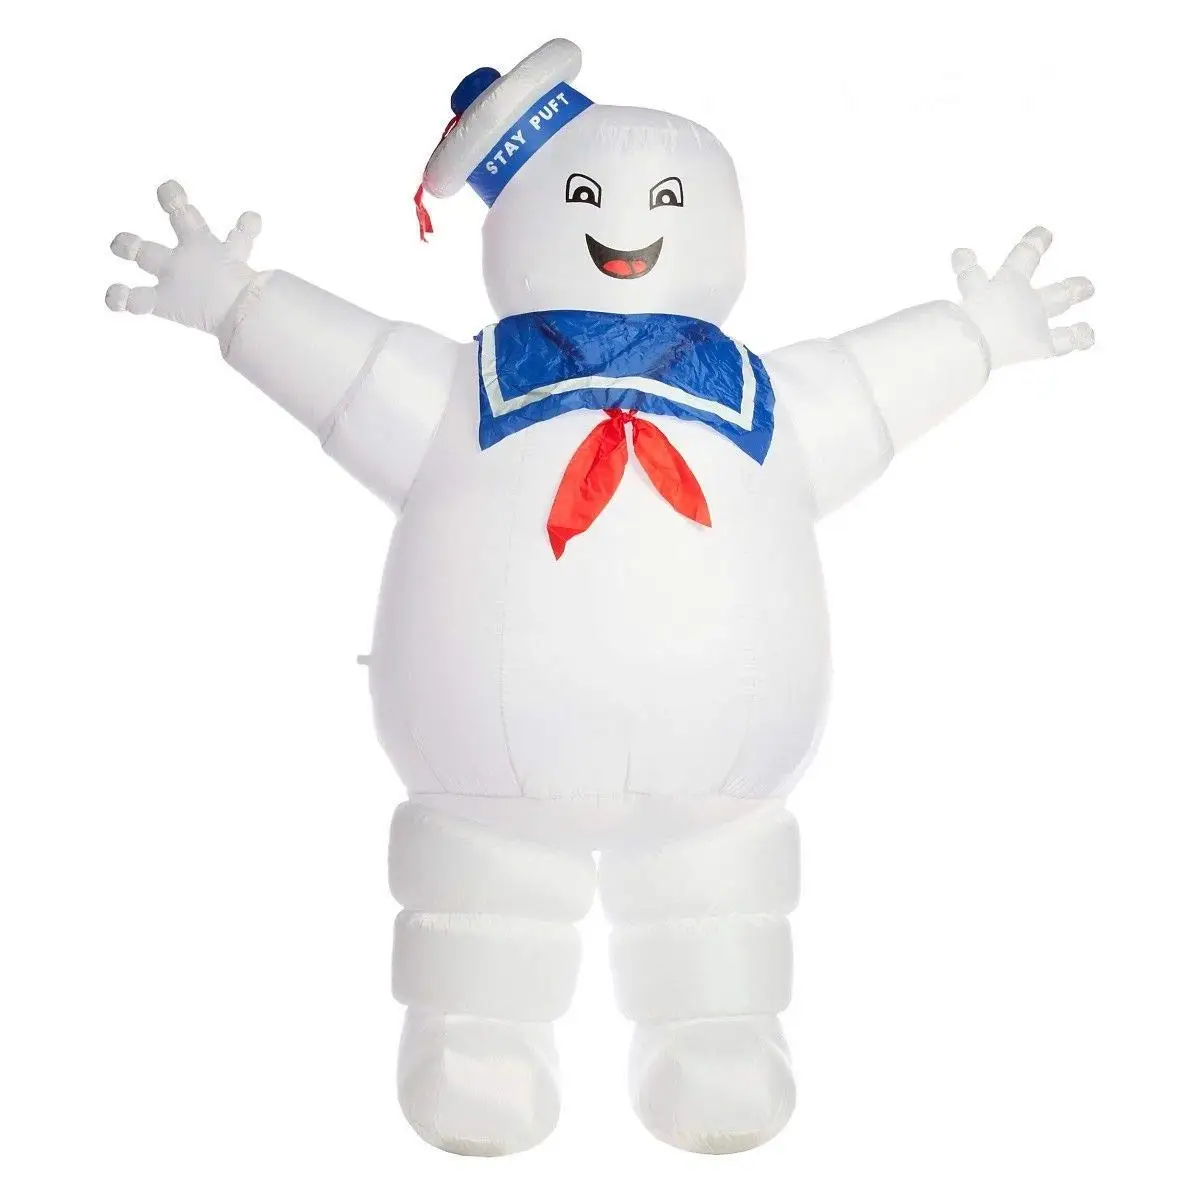 Cheap Stay Puft Marshmallow Man Costume Find Stay Puft Marshmallow Man Costume Deals On Line At Alibaba Com - transparent stay puft marshmallow man roblox costume shop